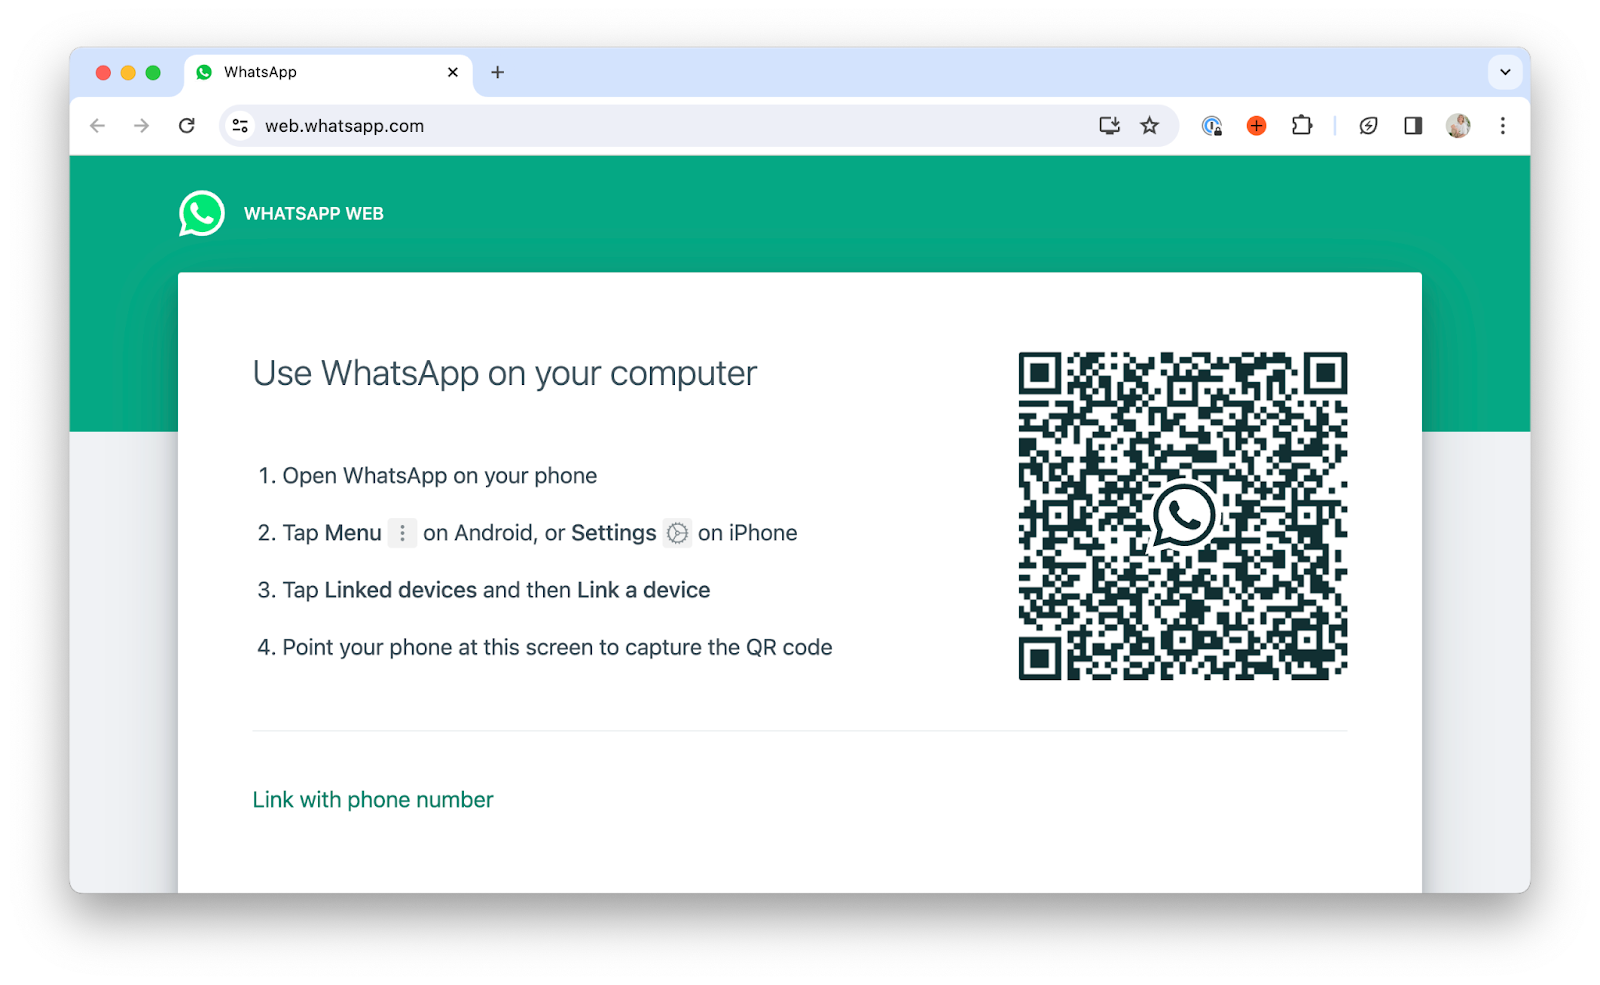 Is WhatsApp Safe to Use for Work?